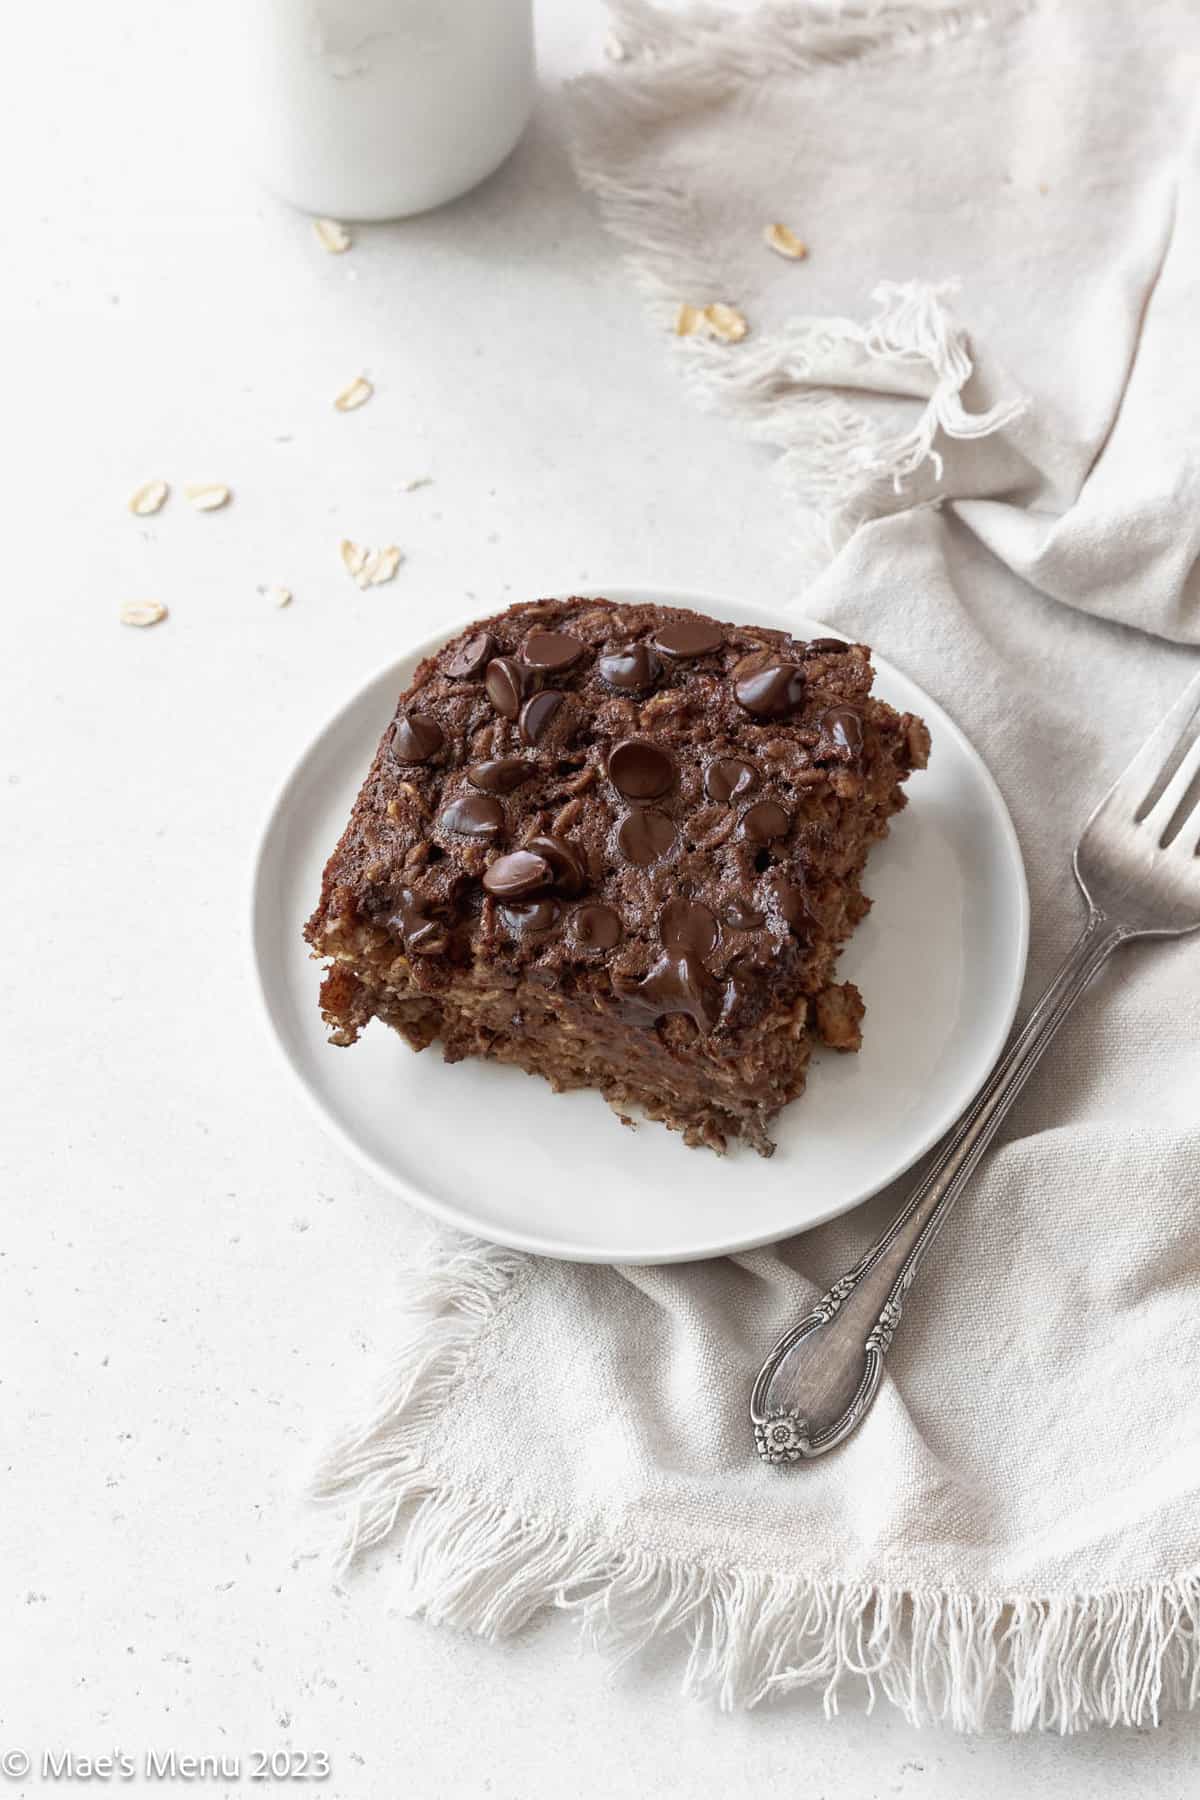 A small white plate with a serving of brownie baked oatmeal on it next to a napkin and fork.